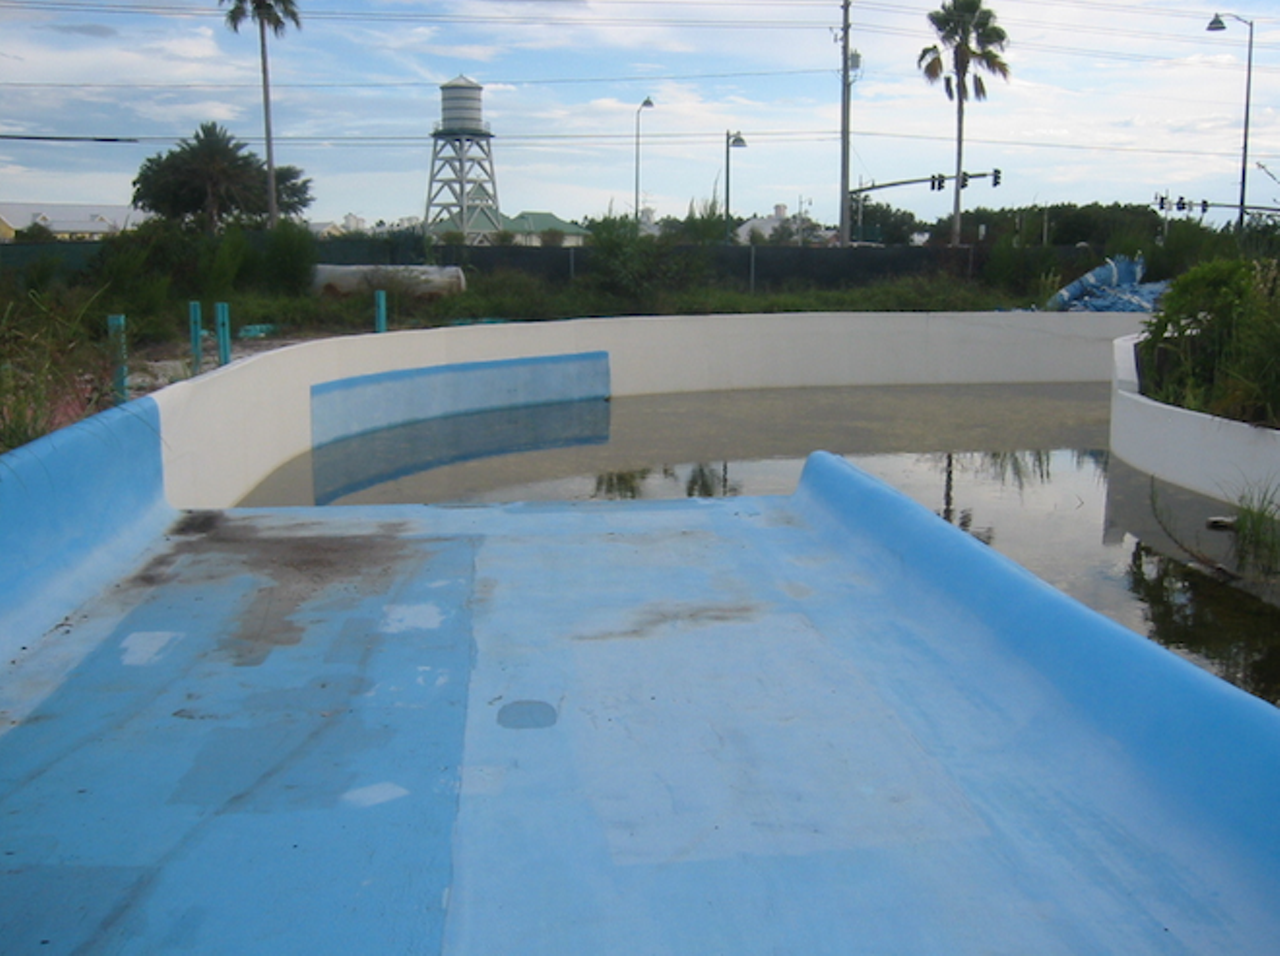 25 eerie shots of Orlando's abandoned Water Mania water park